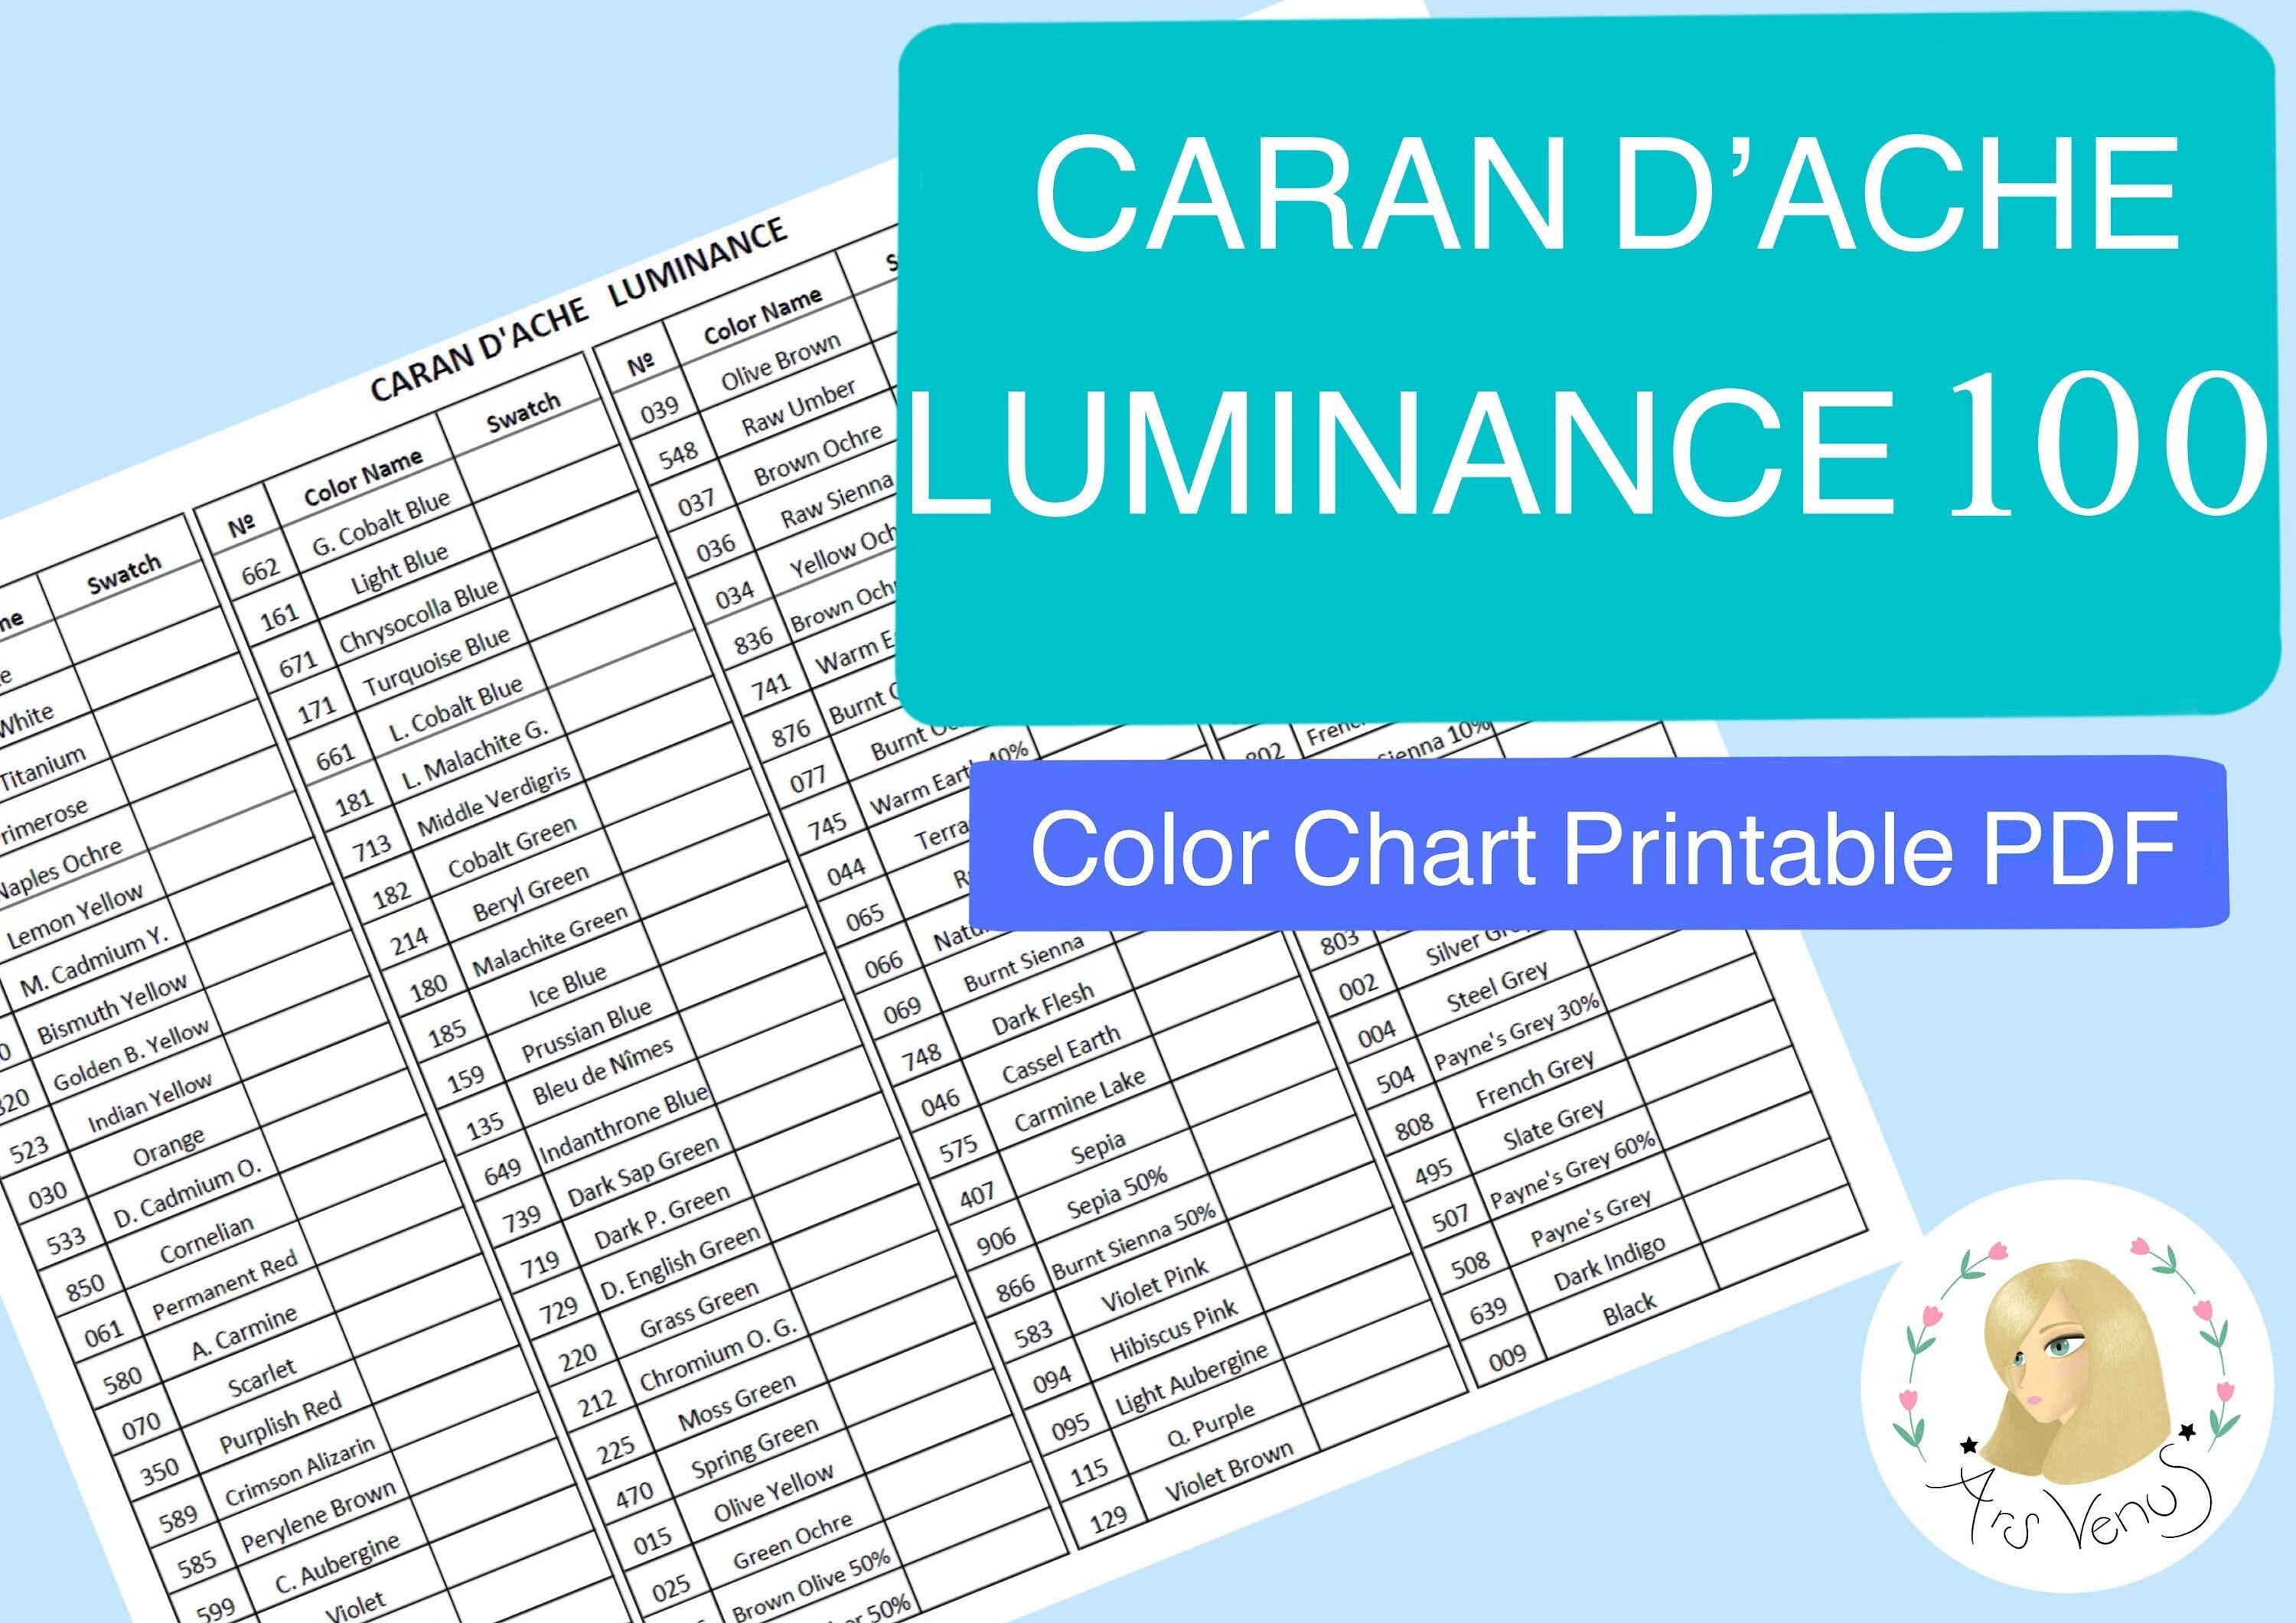 LUMINANCE Colored Pencils Workbook, Color Combinations and Color Swatches  for the Caron D'ache Luminance 12 SET, Printable Worksheets PDF 